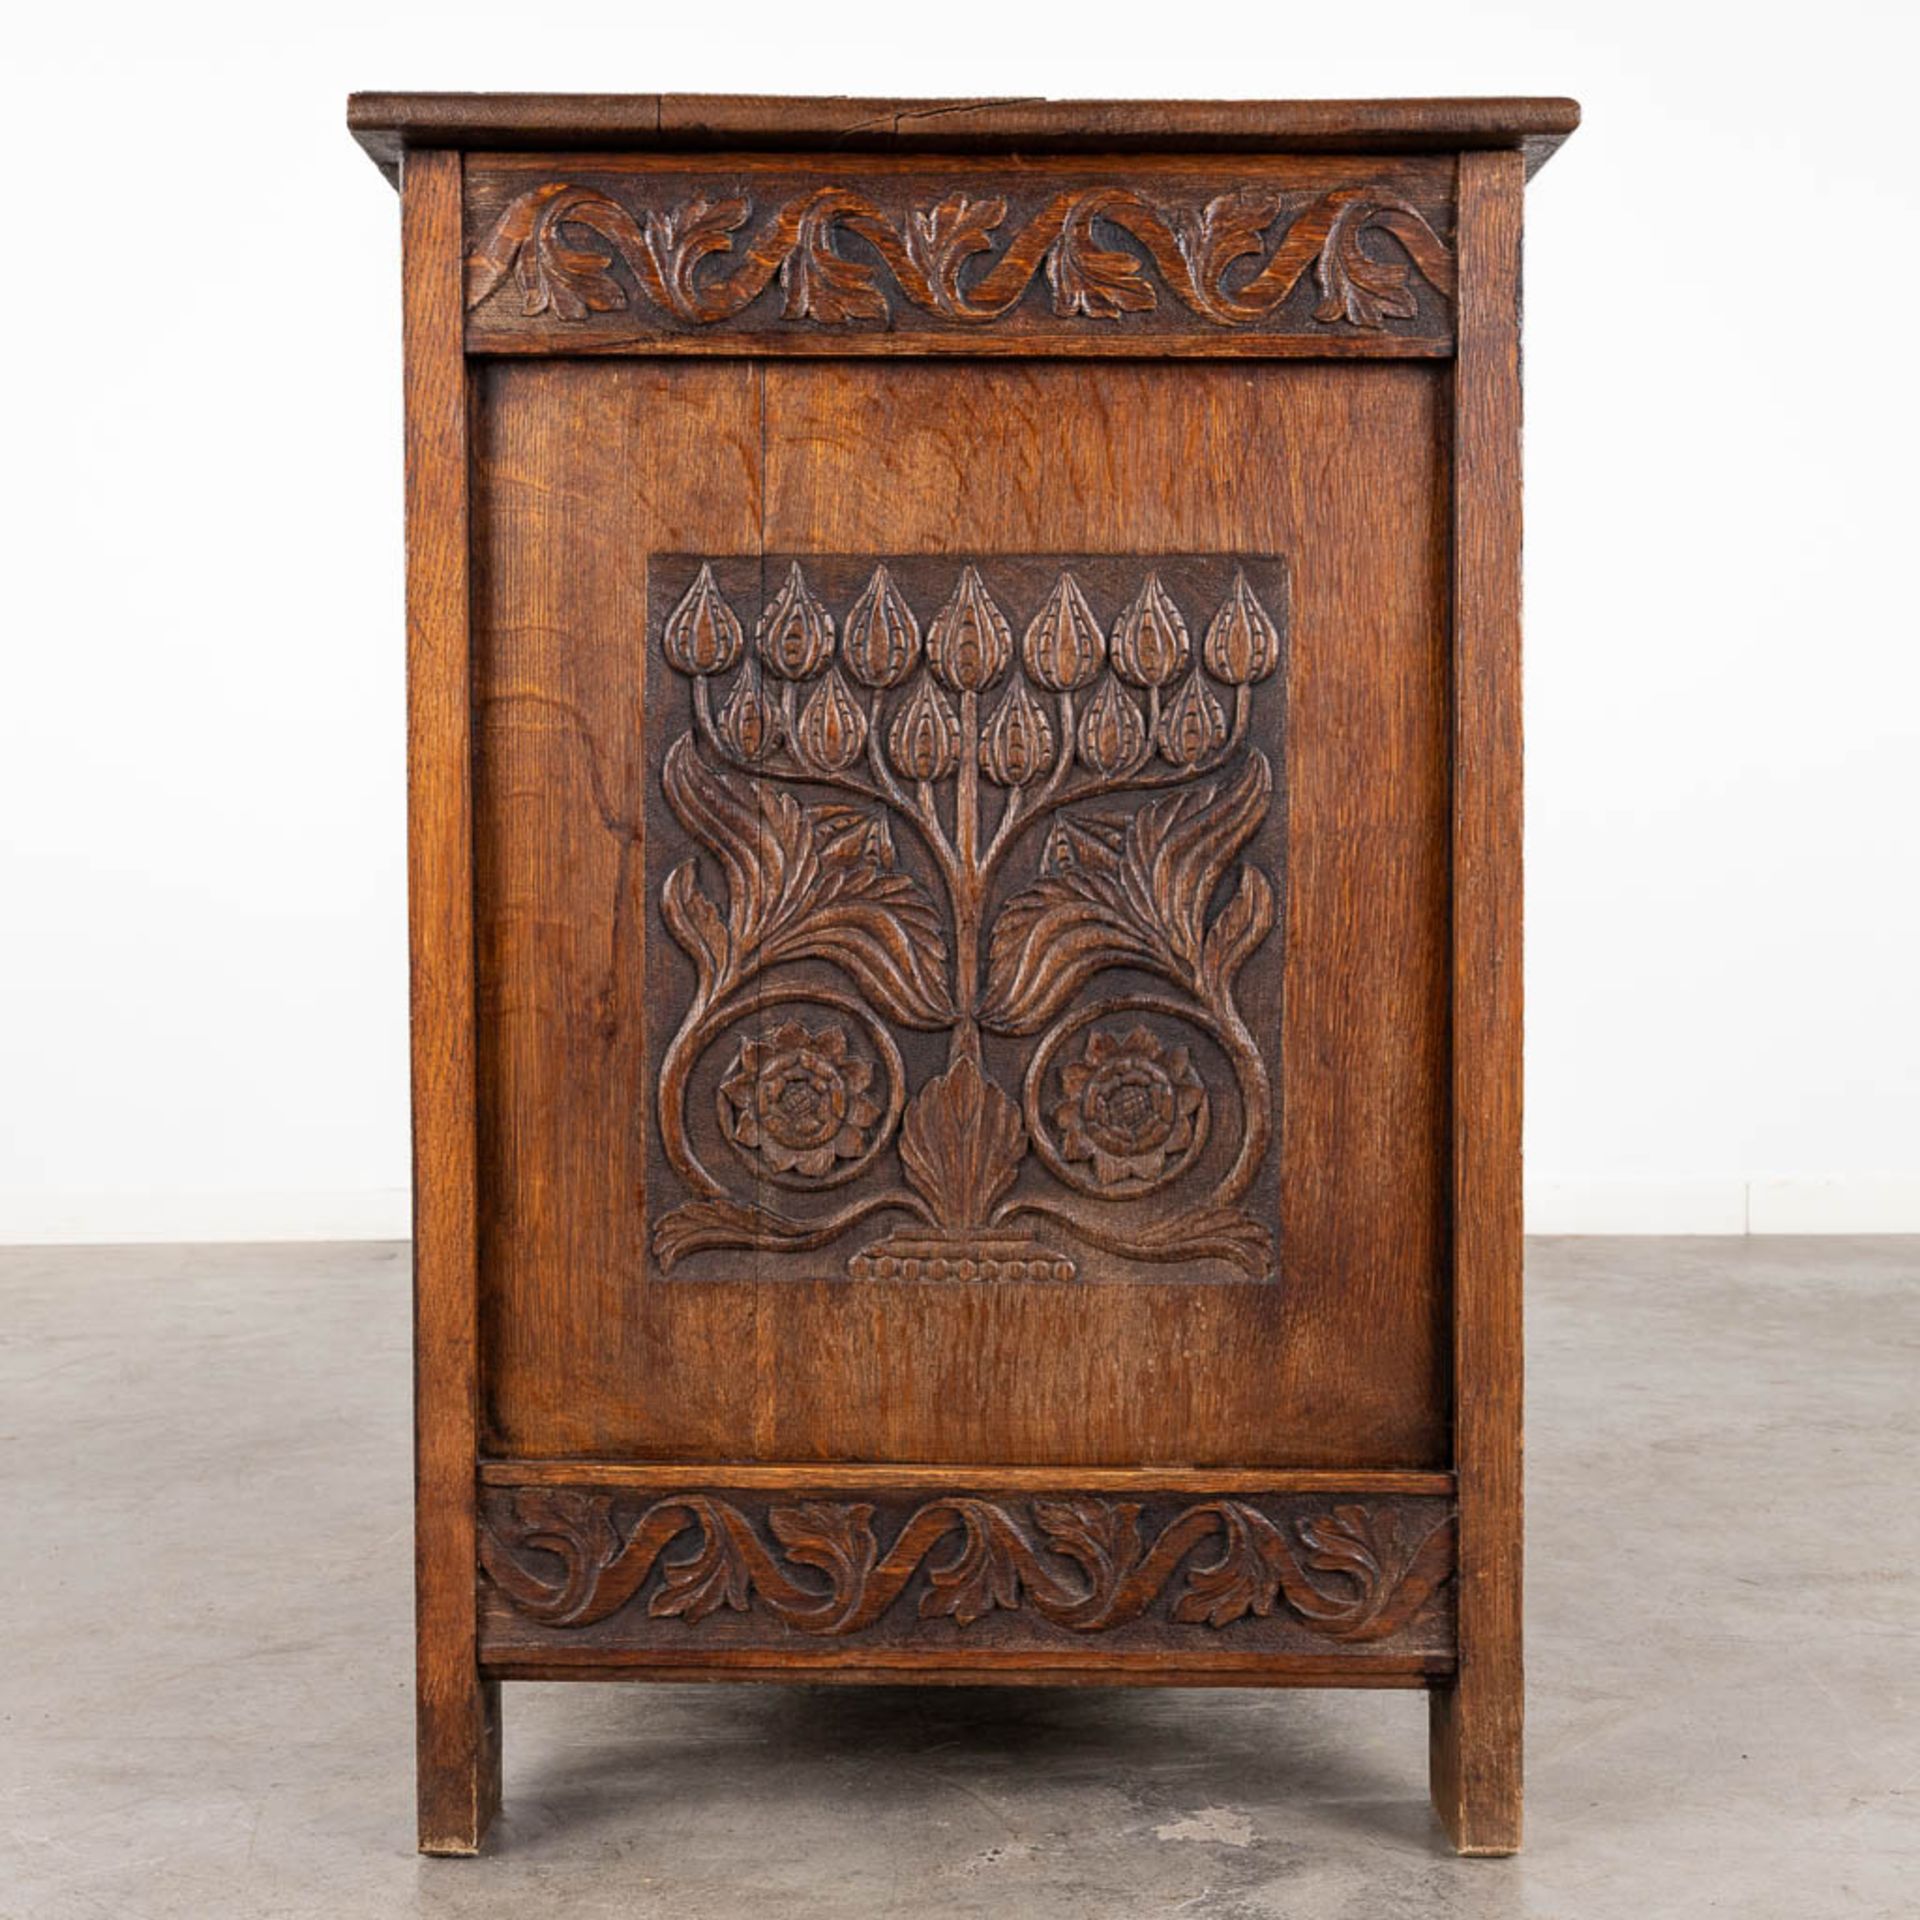 An antique and decorative chest with wood-sculptures. (D:56 x W:122 x H:82 cm) - Image 7 of 15